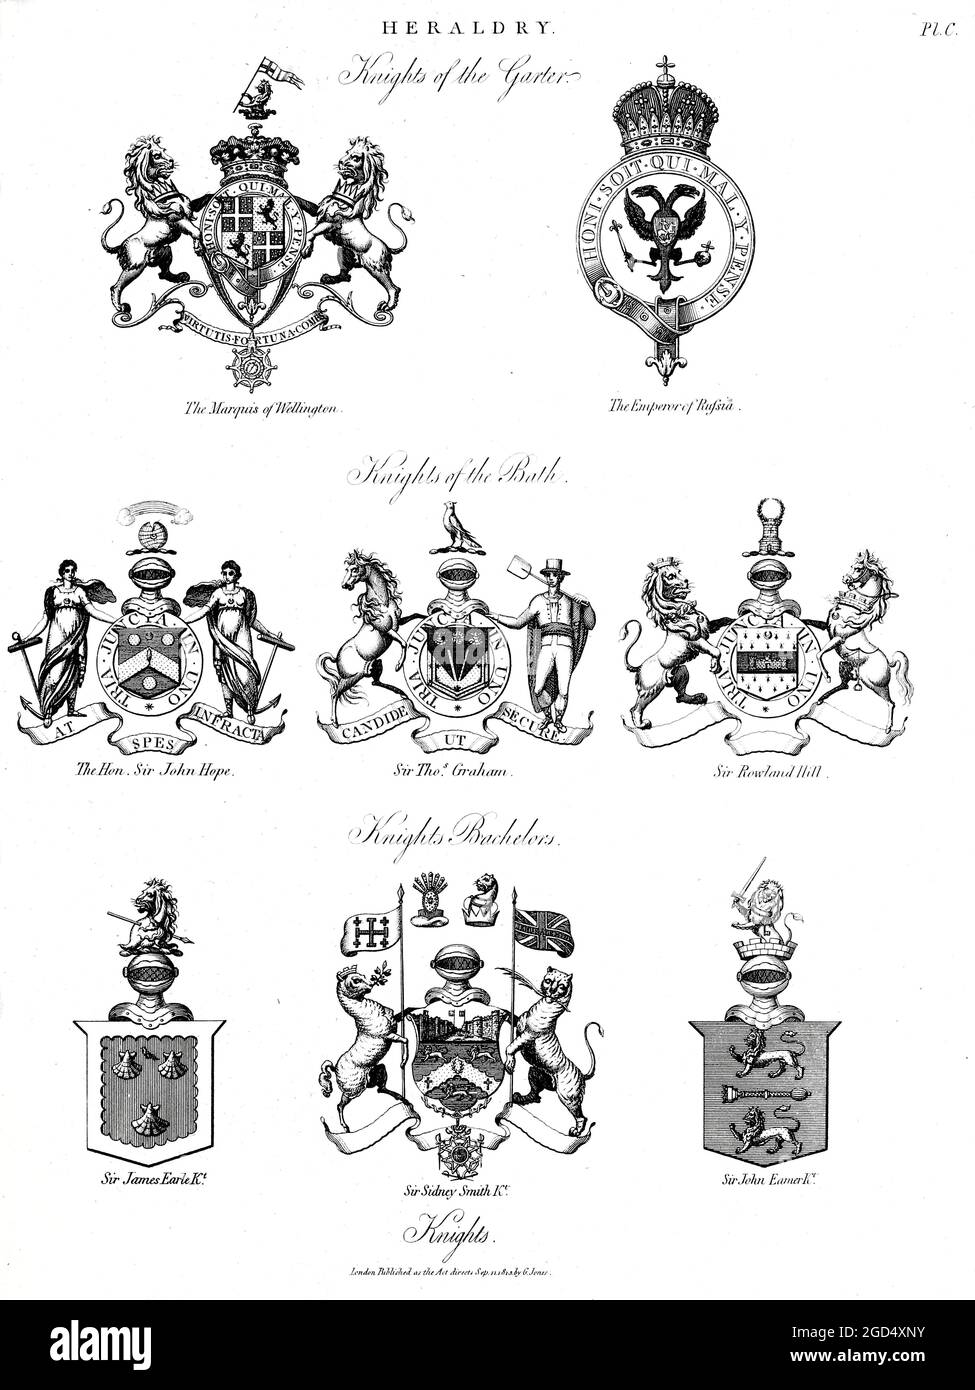 Knights Heraldry is a discipline relating to the design, display and study of armorial bearings (known as armory), as well as related disciplines, such as vexillology, together with the study of ceremony, rank and pedigree. Armory, the best-known branch of heraldry, concerns the design and transmission of the heraldic achievement. The achievement, or armorial bearings usually includes a coat of arms on a shield, helmet and crest, together with any accompanying devices, such as supporters, badges, heraldic banners and mottoes. Copperplate engraving From the Encyclopaedia Londinensis or, Univers Stock Photo